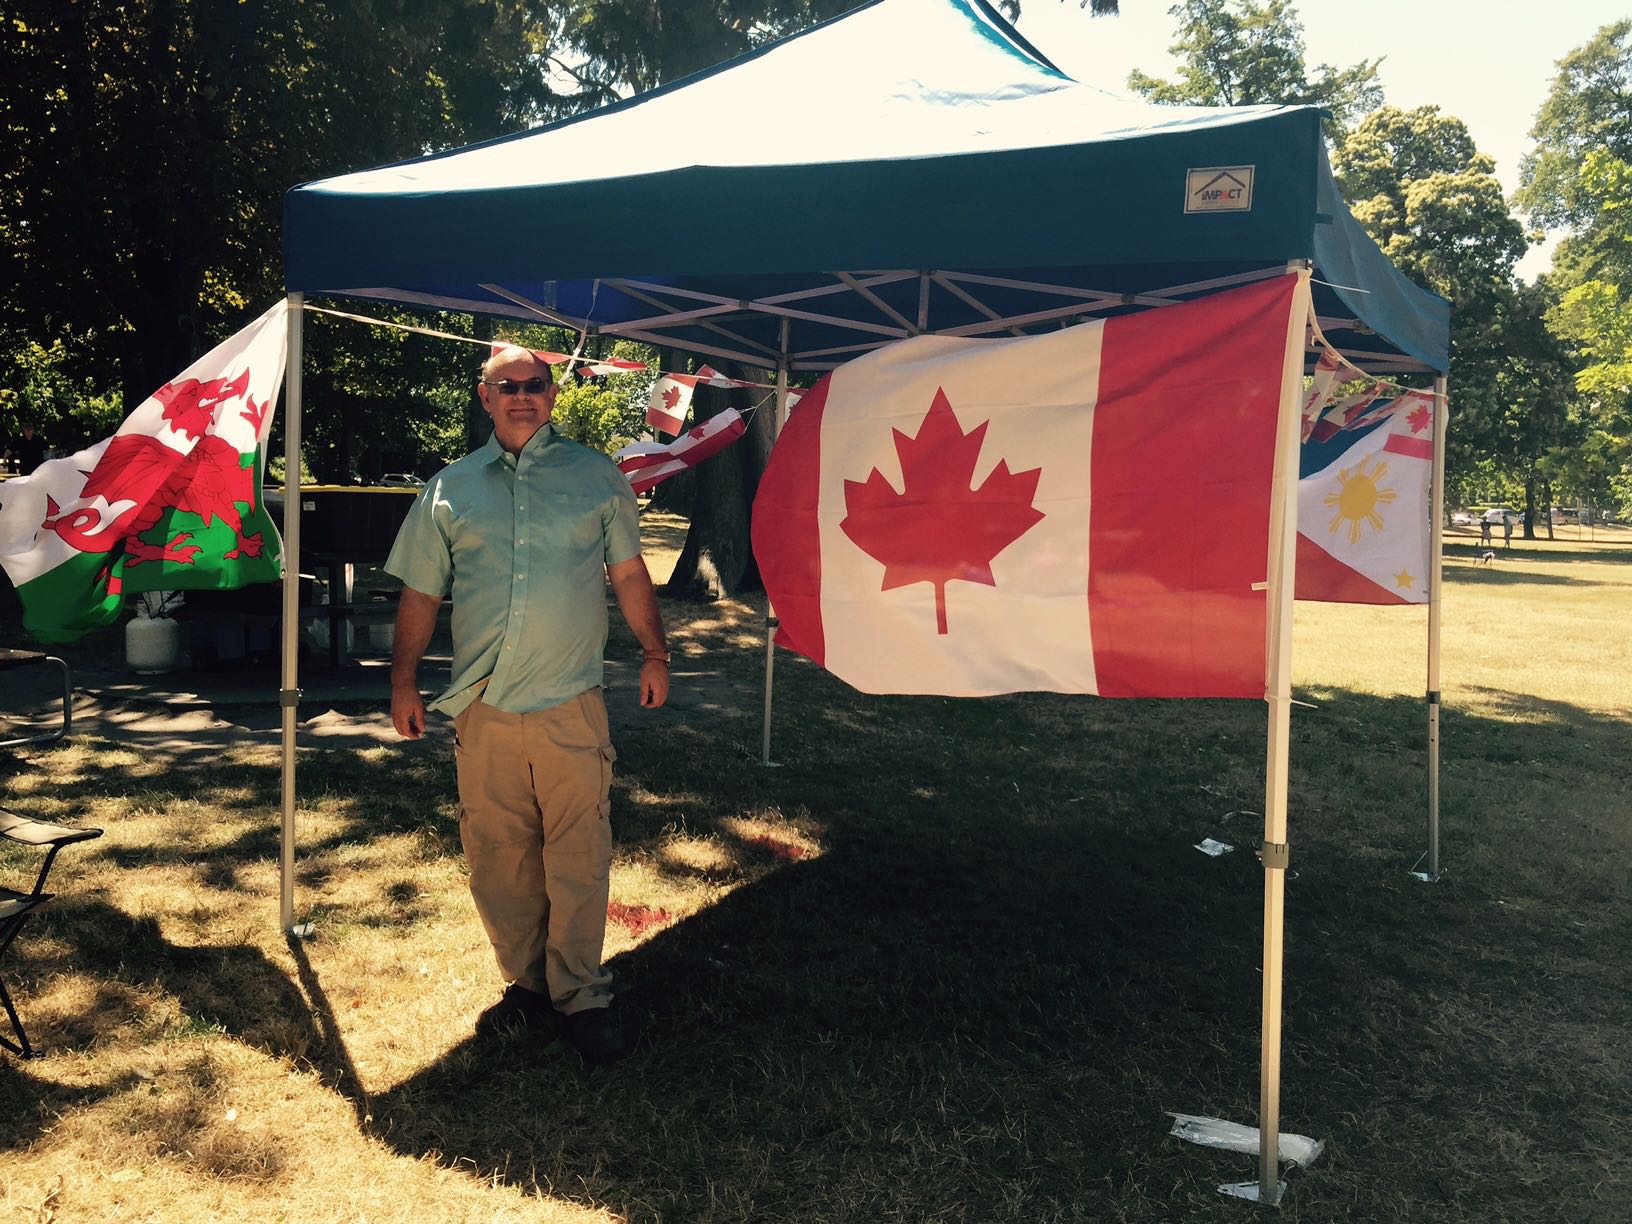 Terry from Mr. Locksmith Vancouver Canada Day 2015.